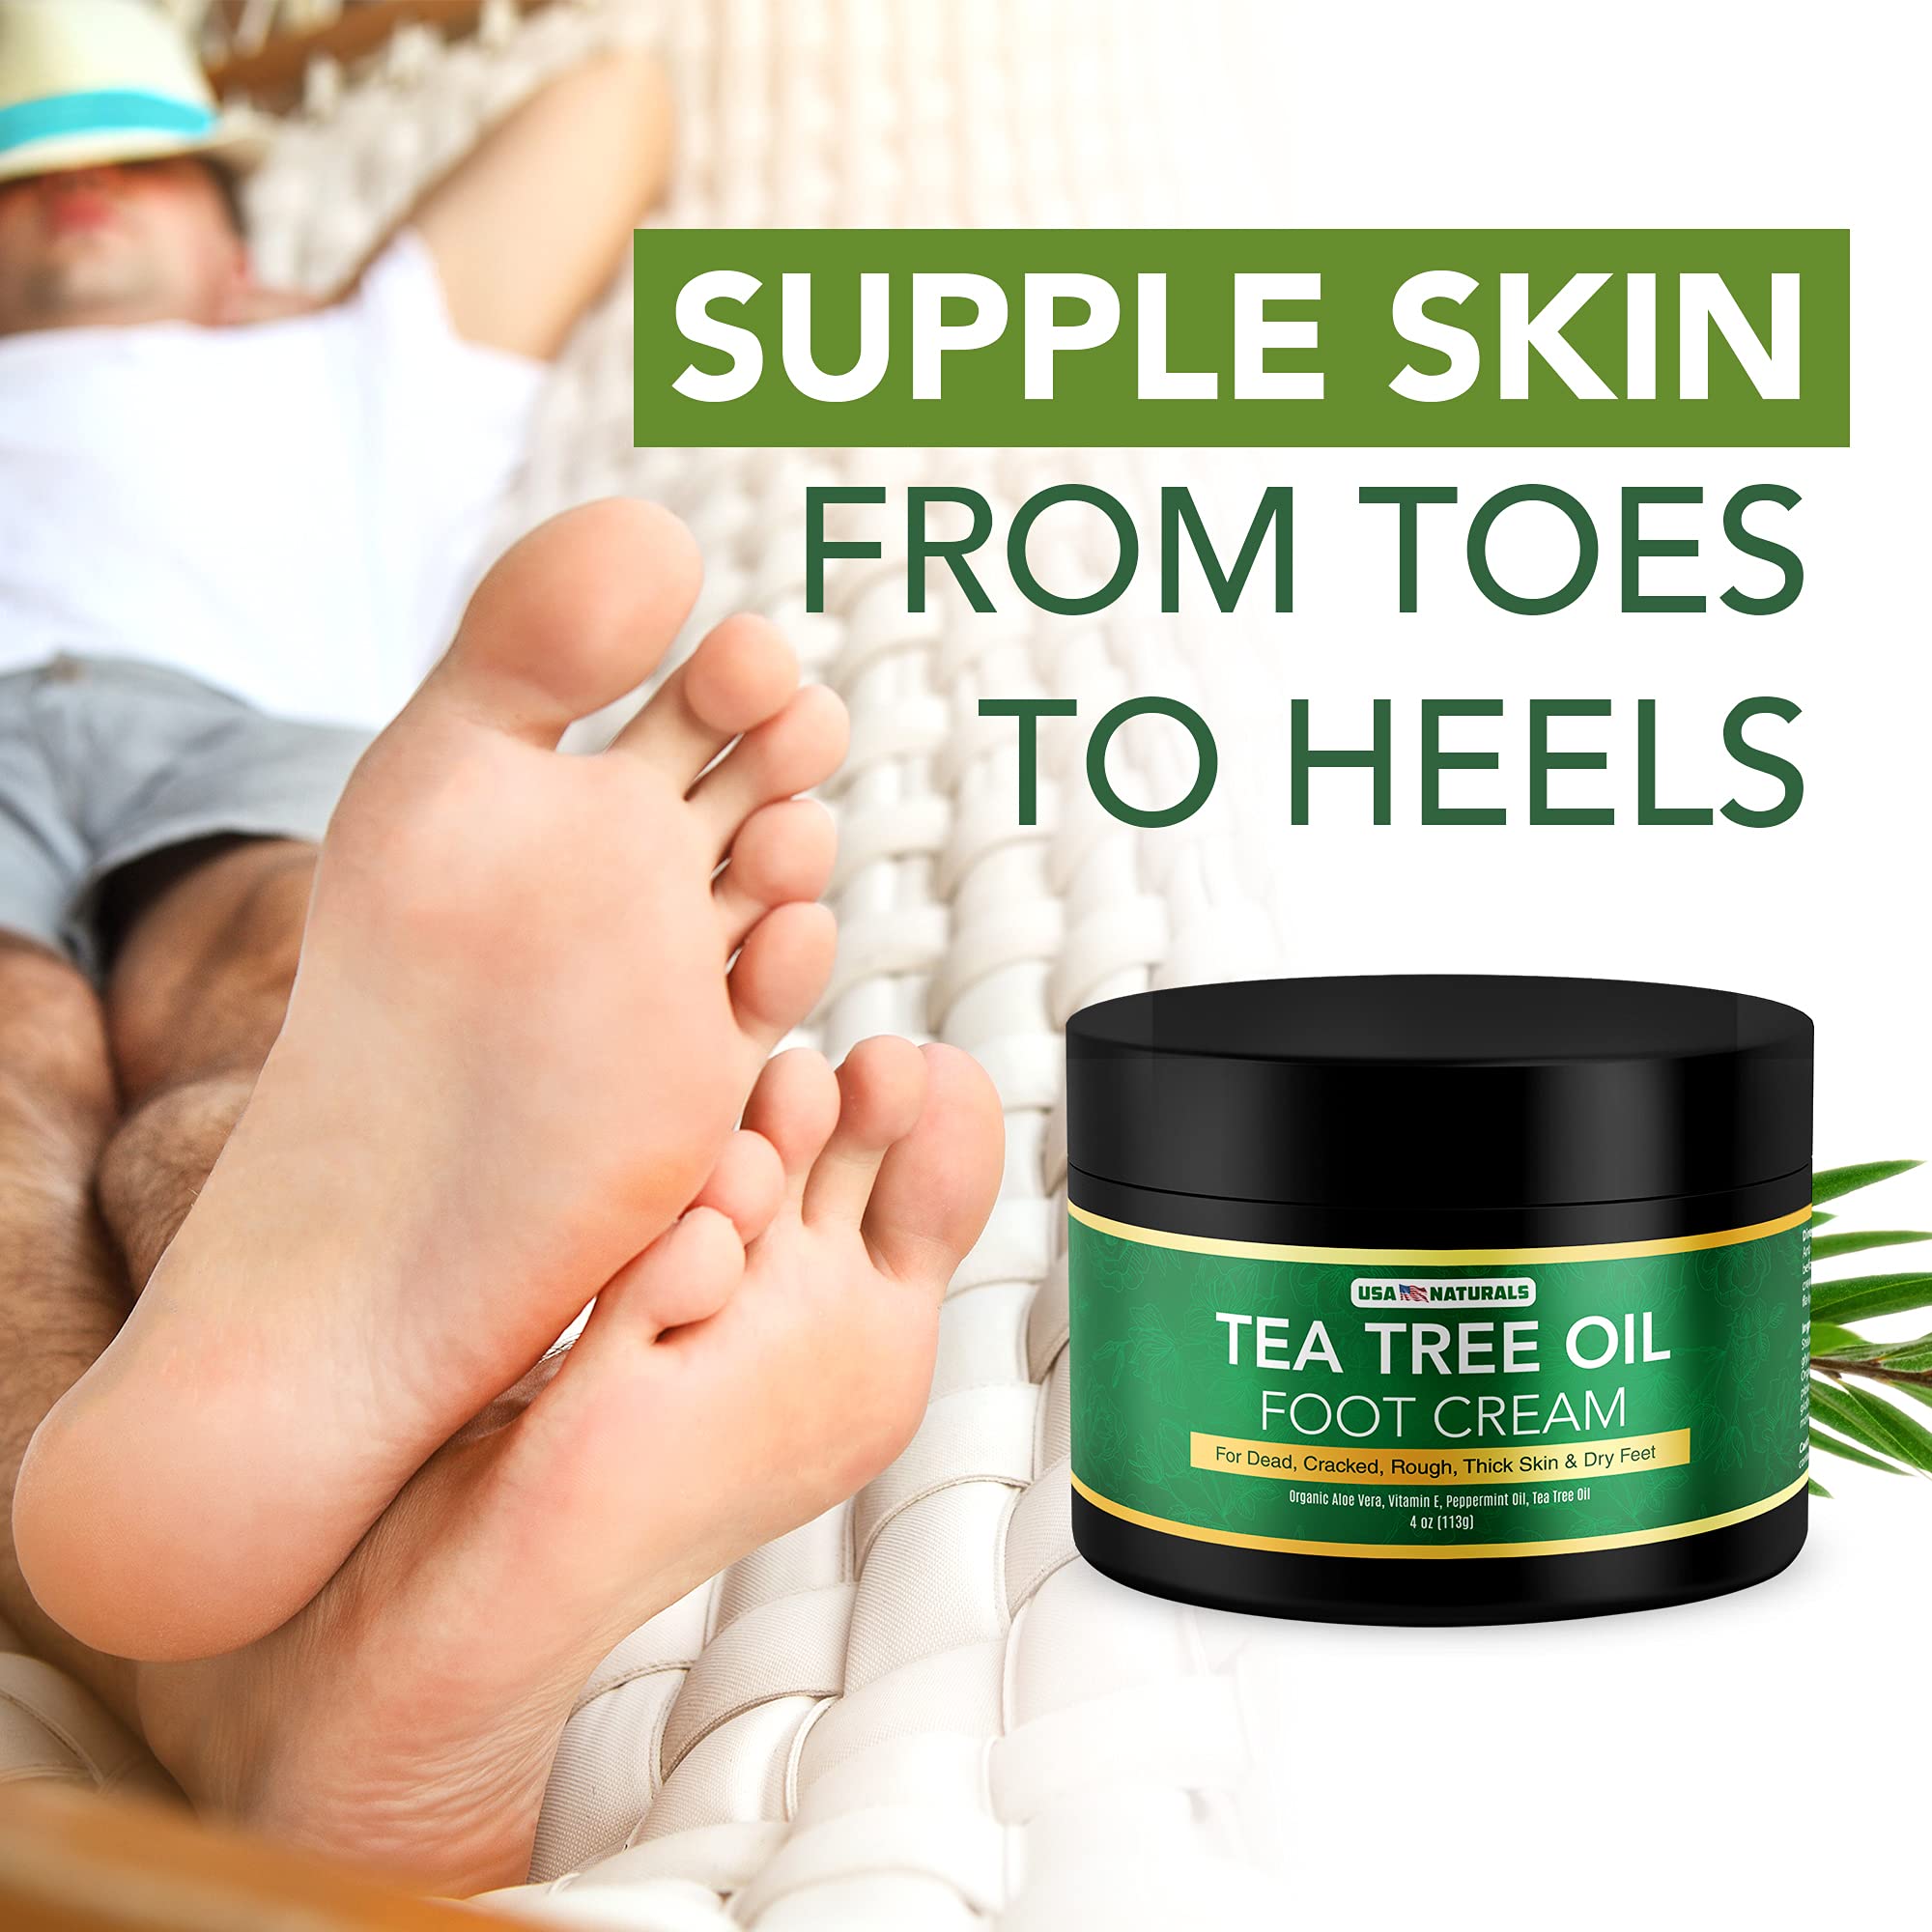 Tea Tree Oil Foot Cream - Instantly Hydrates and Moisturizes Cracked or Callused Feet - Rapid Relief Heel Cream - Natural Treatment Helps & Soothes Irritated Skin & Athletes Foot